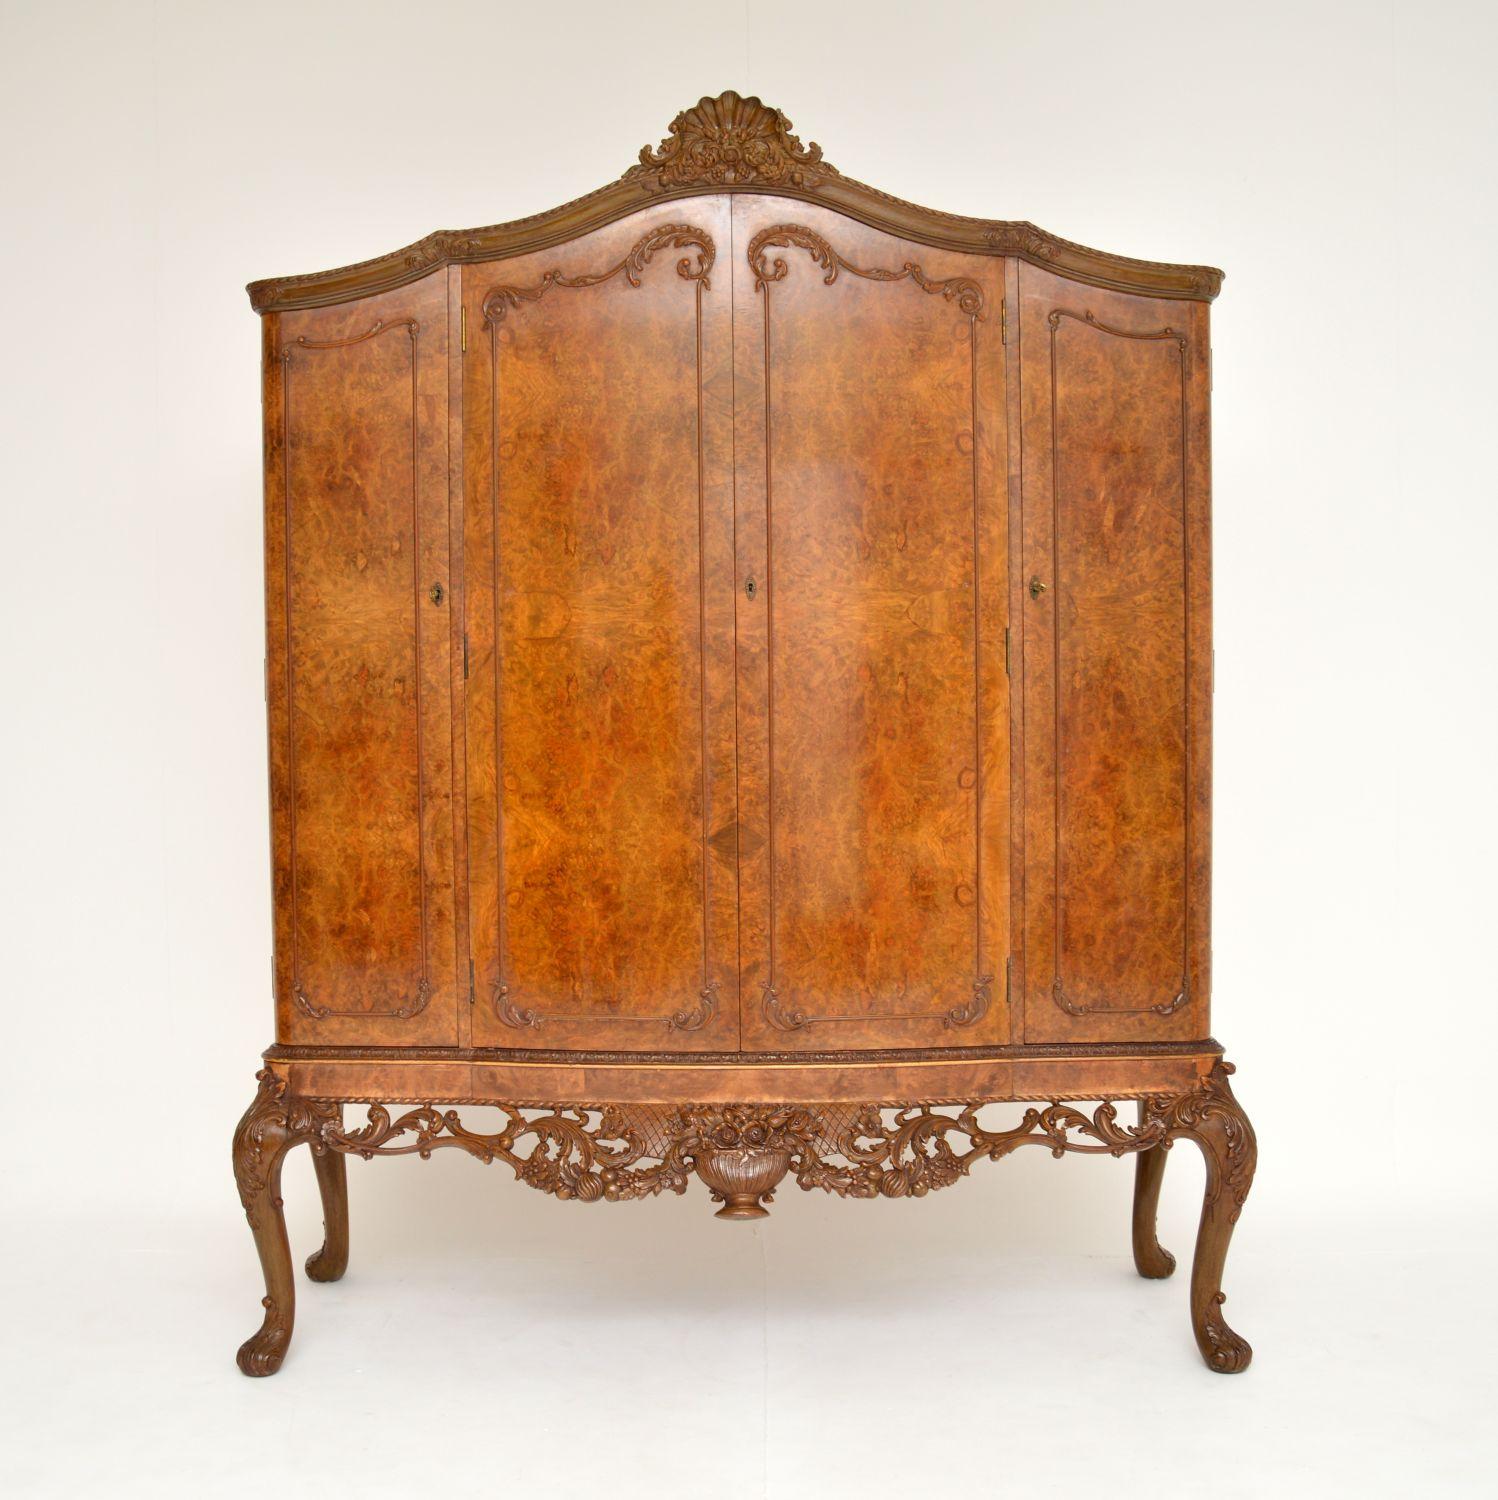 A magnificent antique burr walnut cocktail drinks cabinet in the Queen Anne style. This was made in England & dates from around the 1920-30’s period.
It is larger than the usual ones we find, and of absolutely superb quality. There are four doors